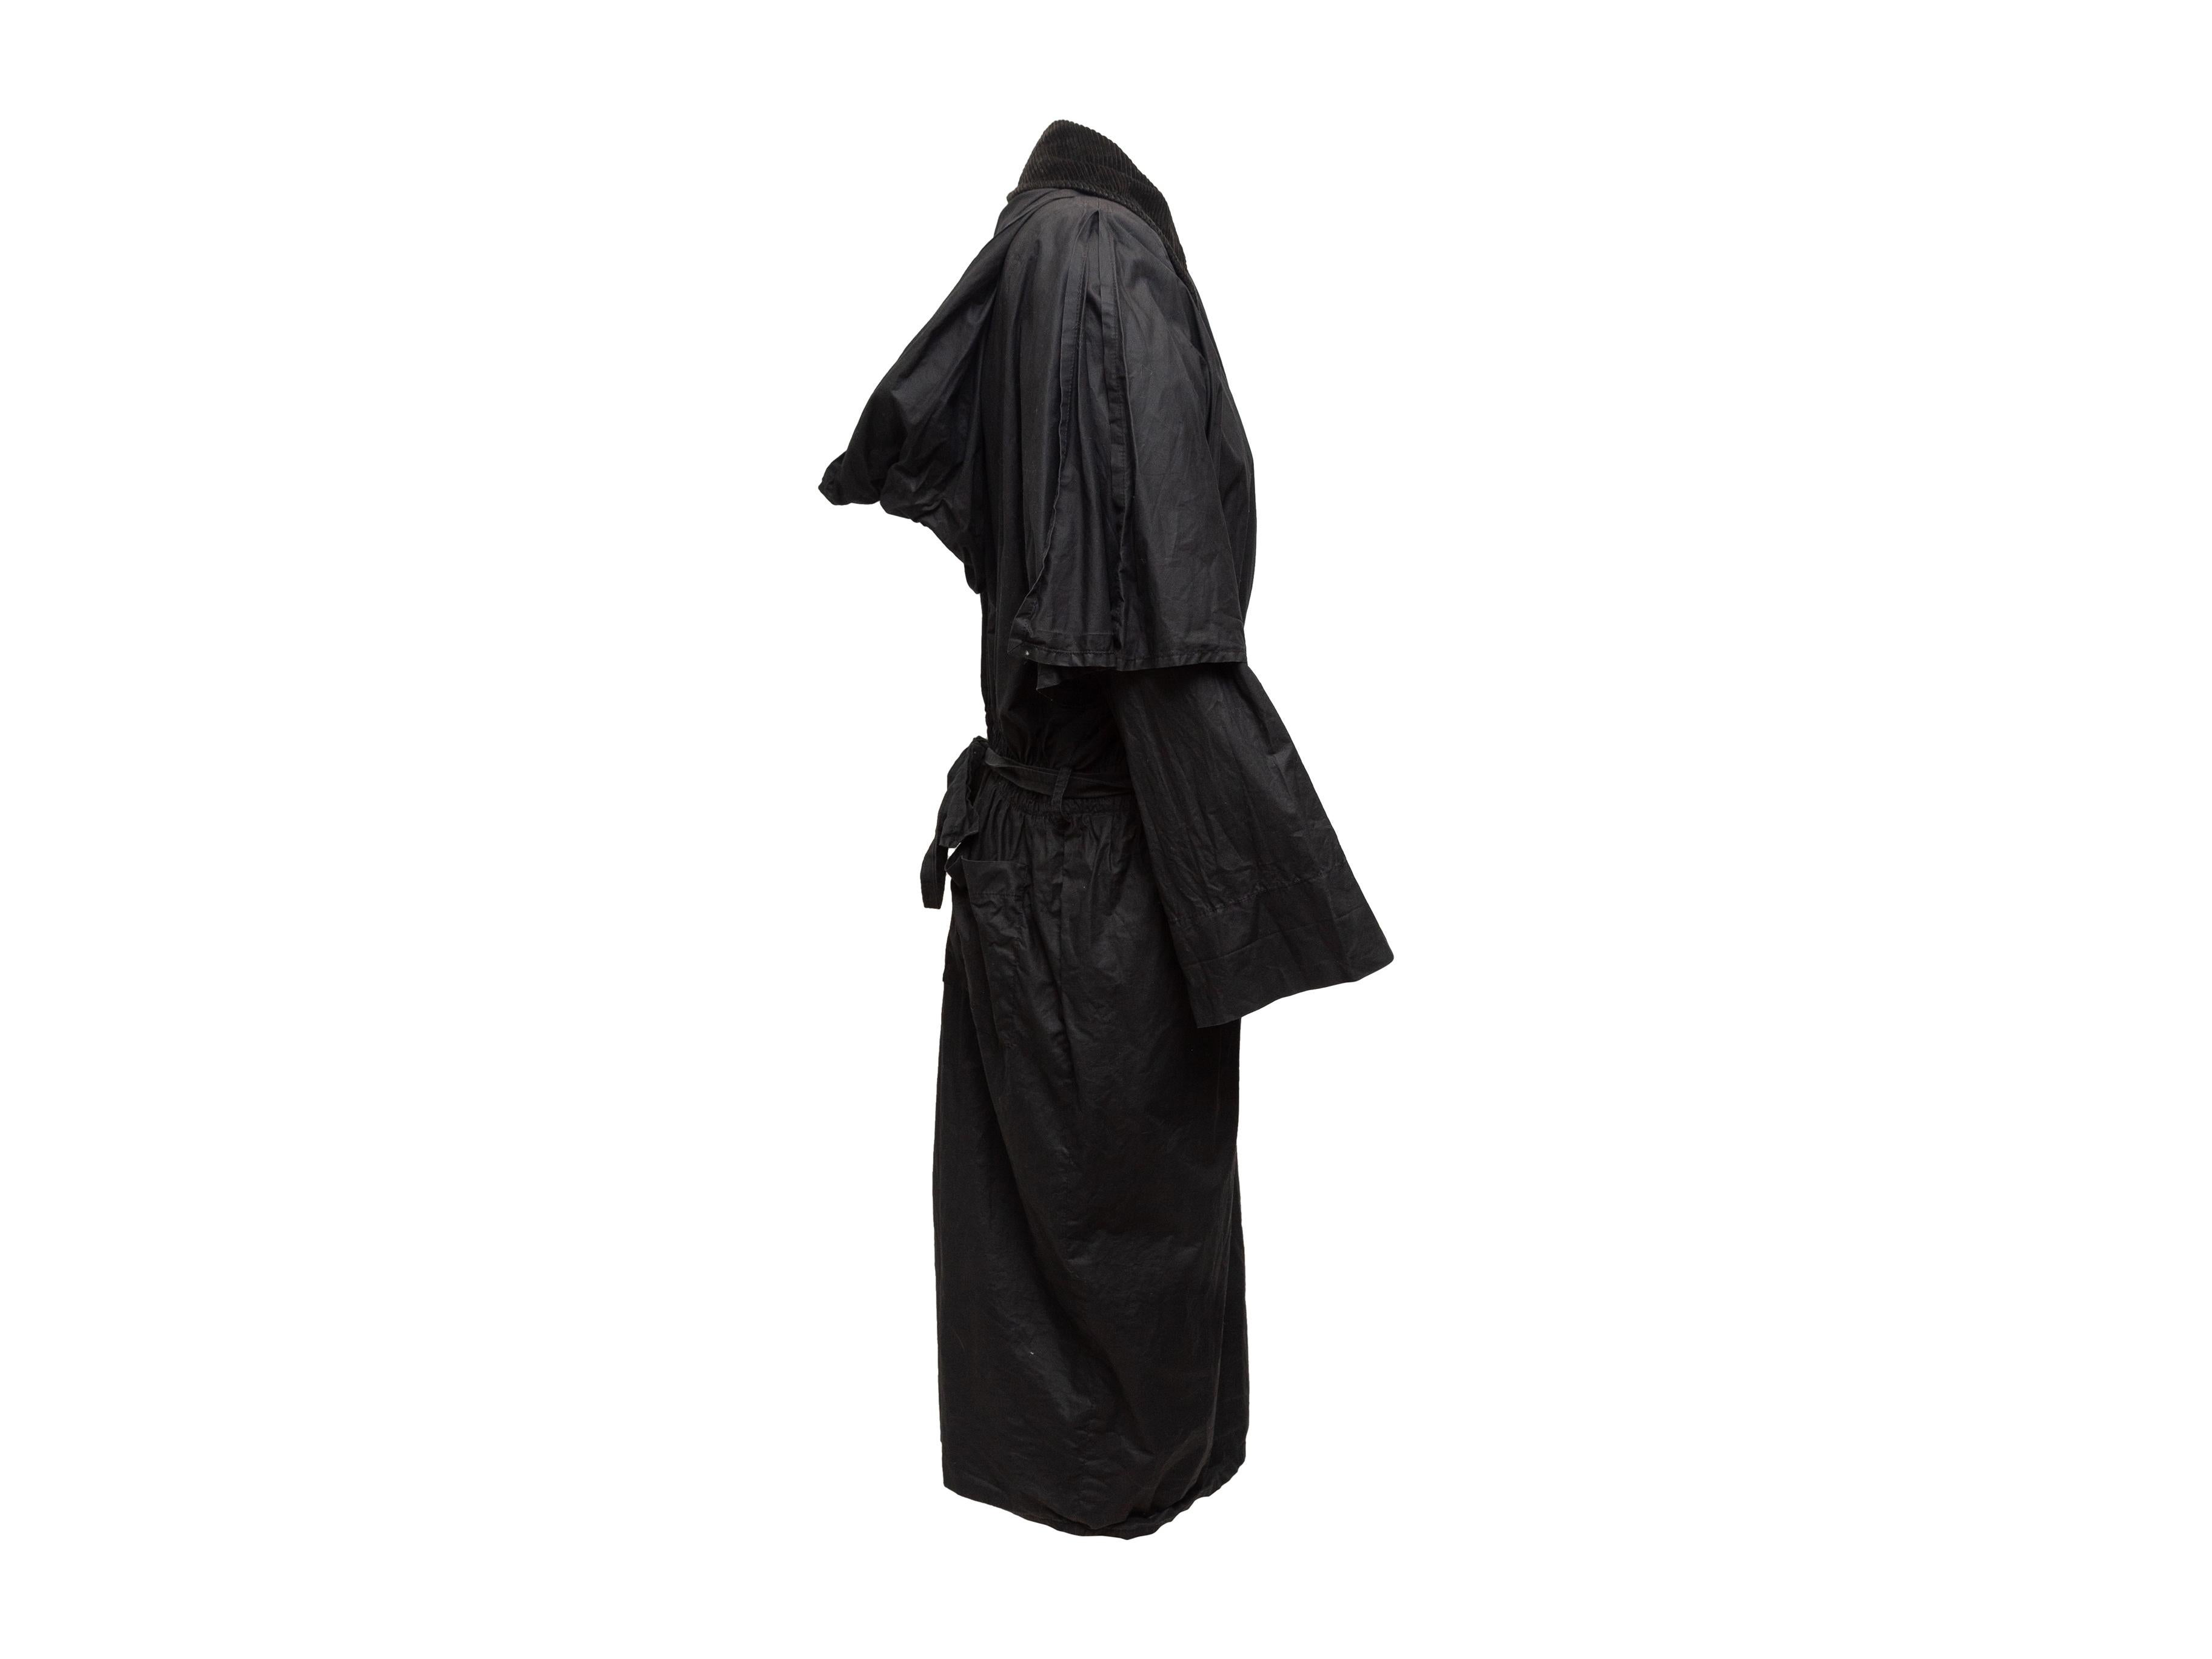 Product details: Vintage black coated cotton hooded coat by Sonia Rykiel. Corduroy pointed collar. Dual back pockets. Sash tie at waist. Closures at front. 25